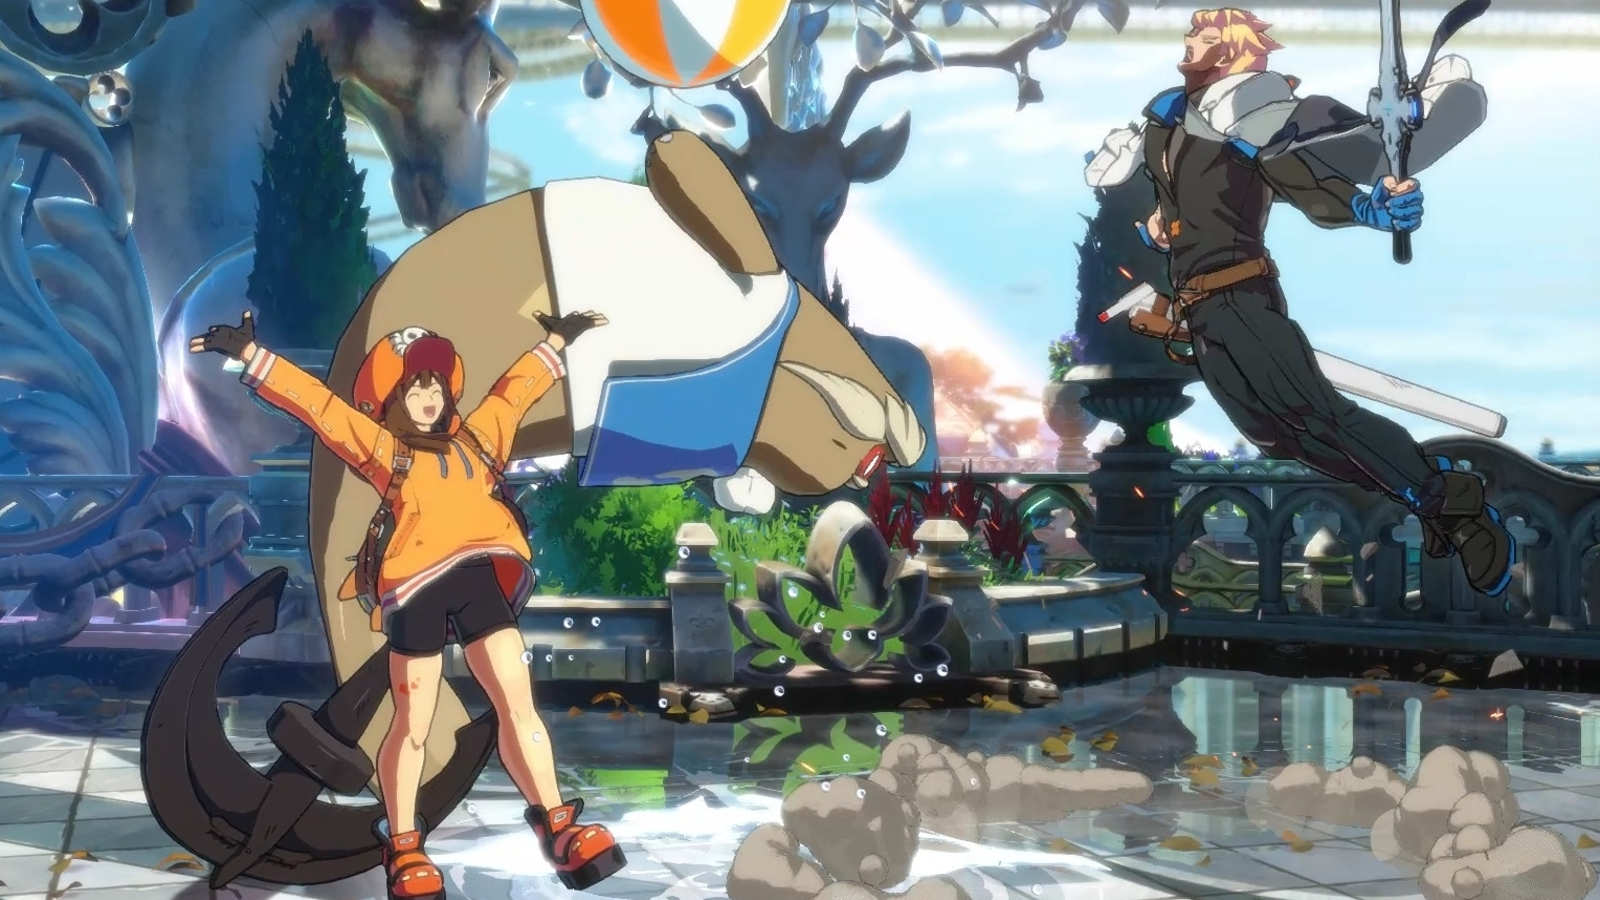 What if: the Guilty Gear Strive team made a One Piece fighting game?